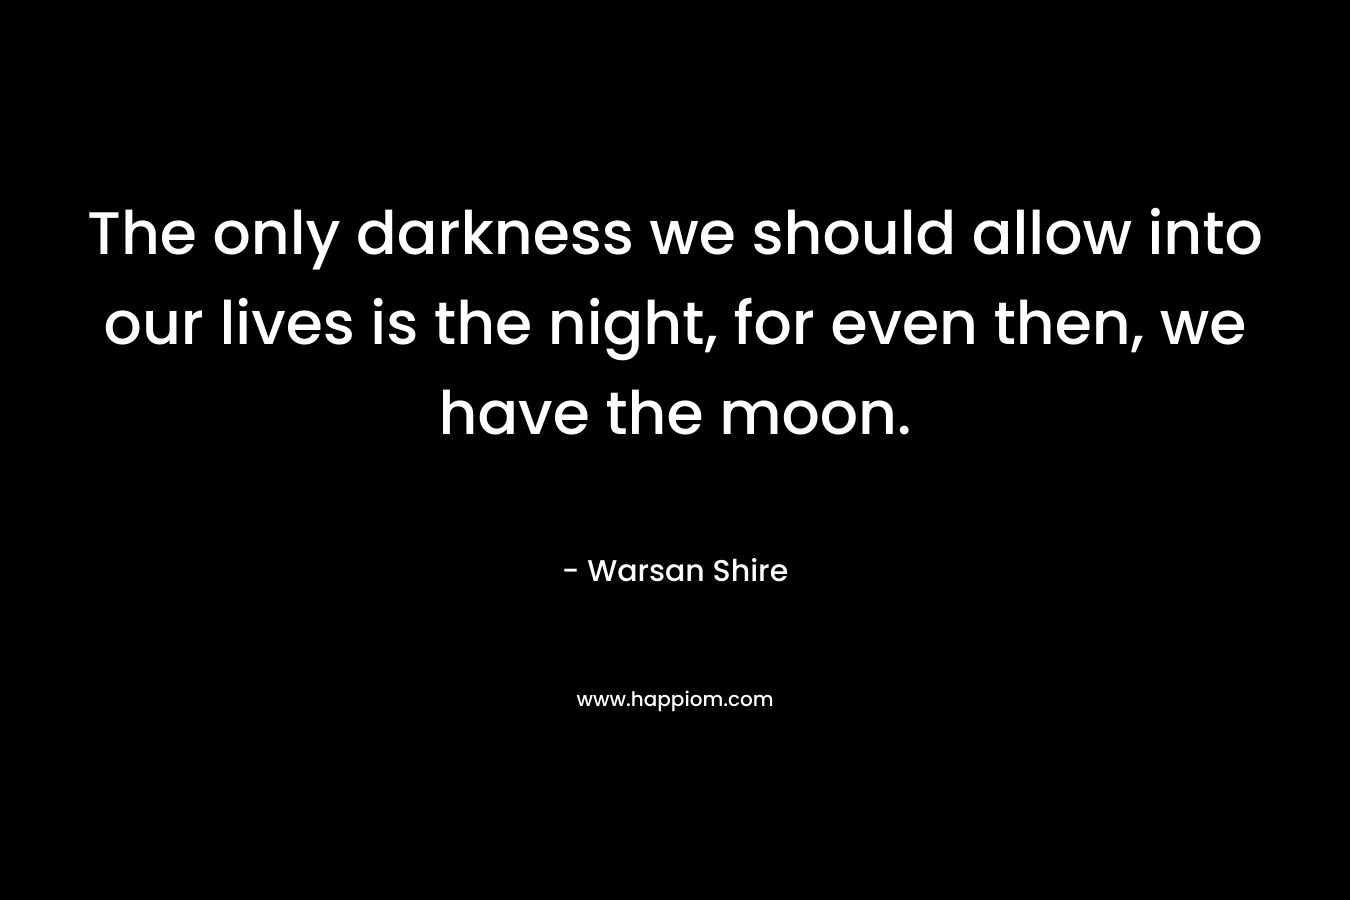 The only darkness we should allow into our lives is the night, for even then, we have the moon.